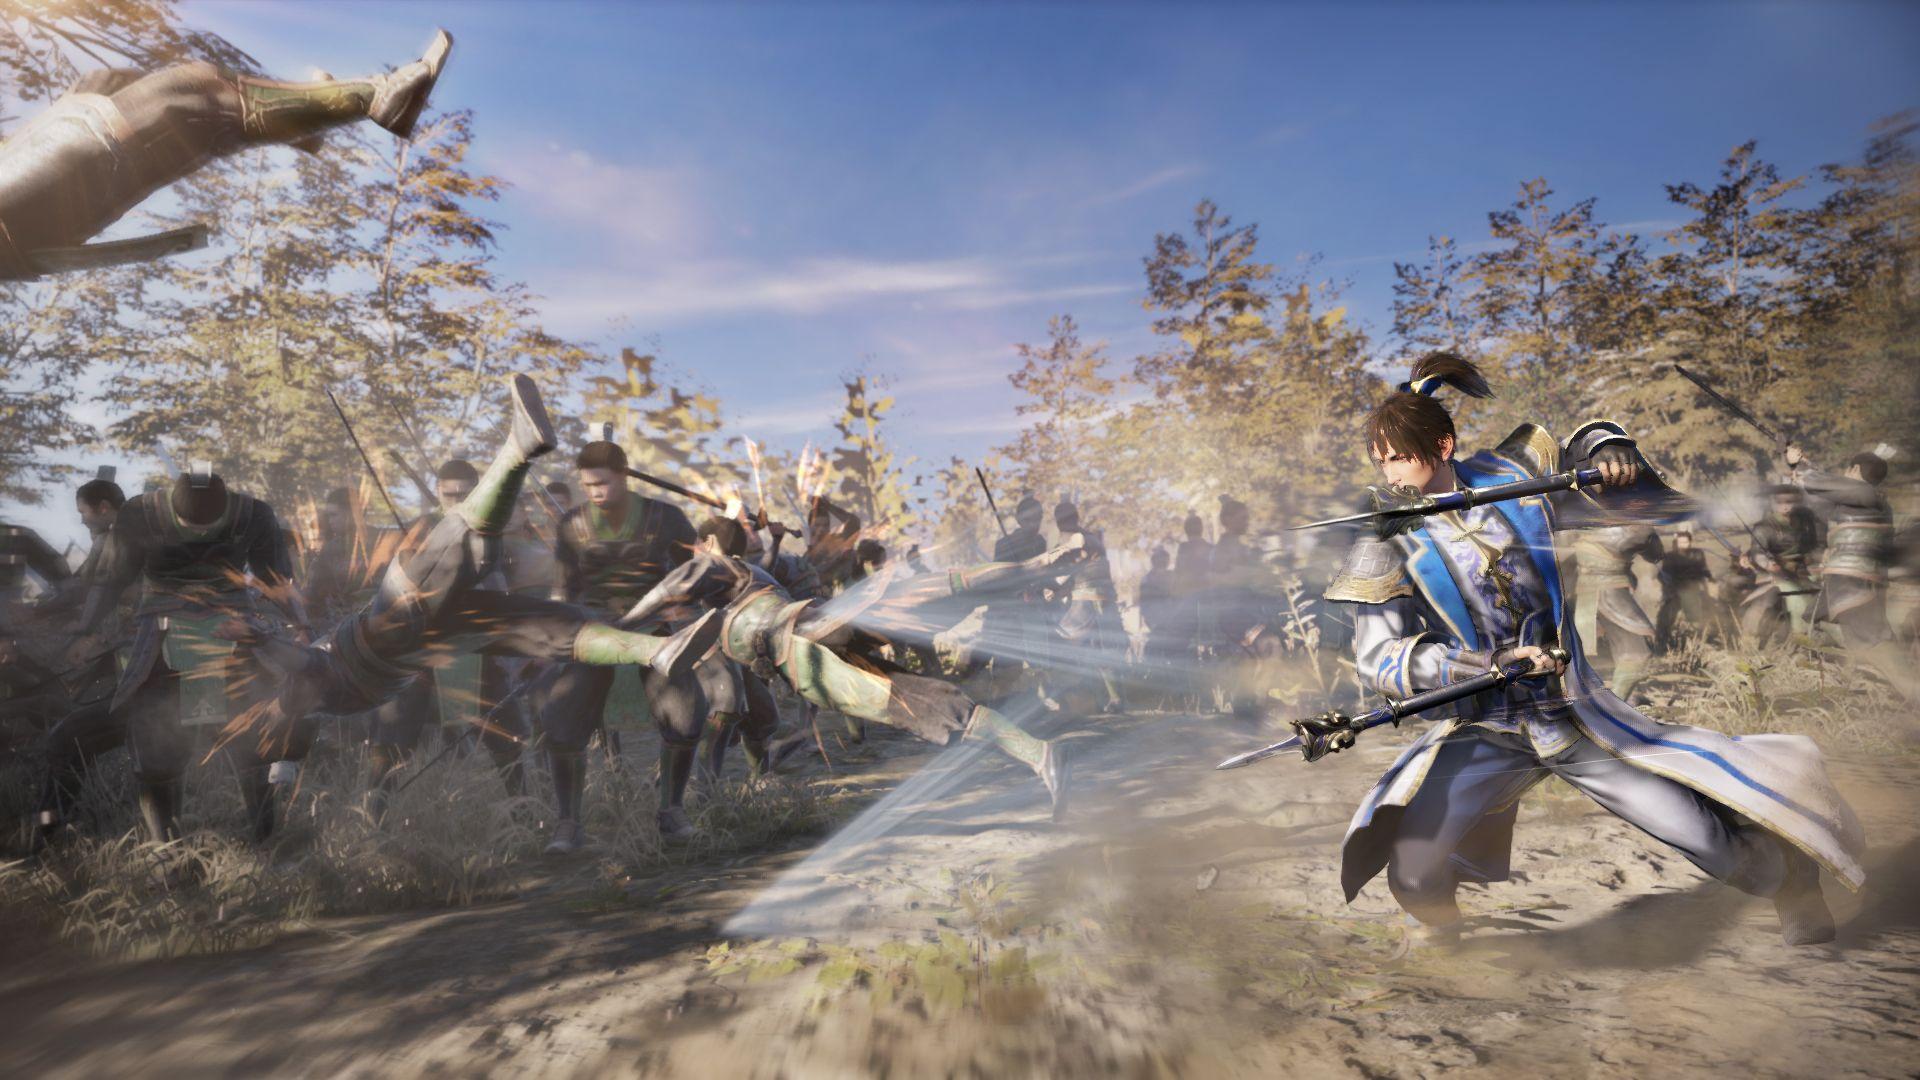 Dynasty Warriors 9 Uses Geometry Rendering To Upscale To 4K on PS4